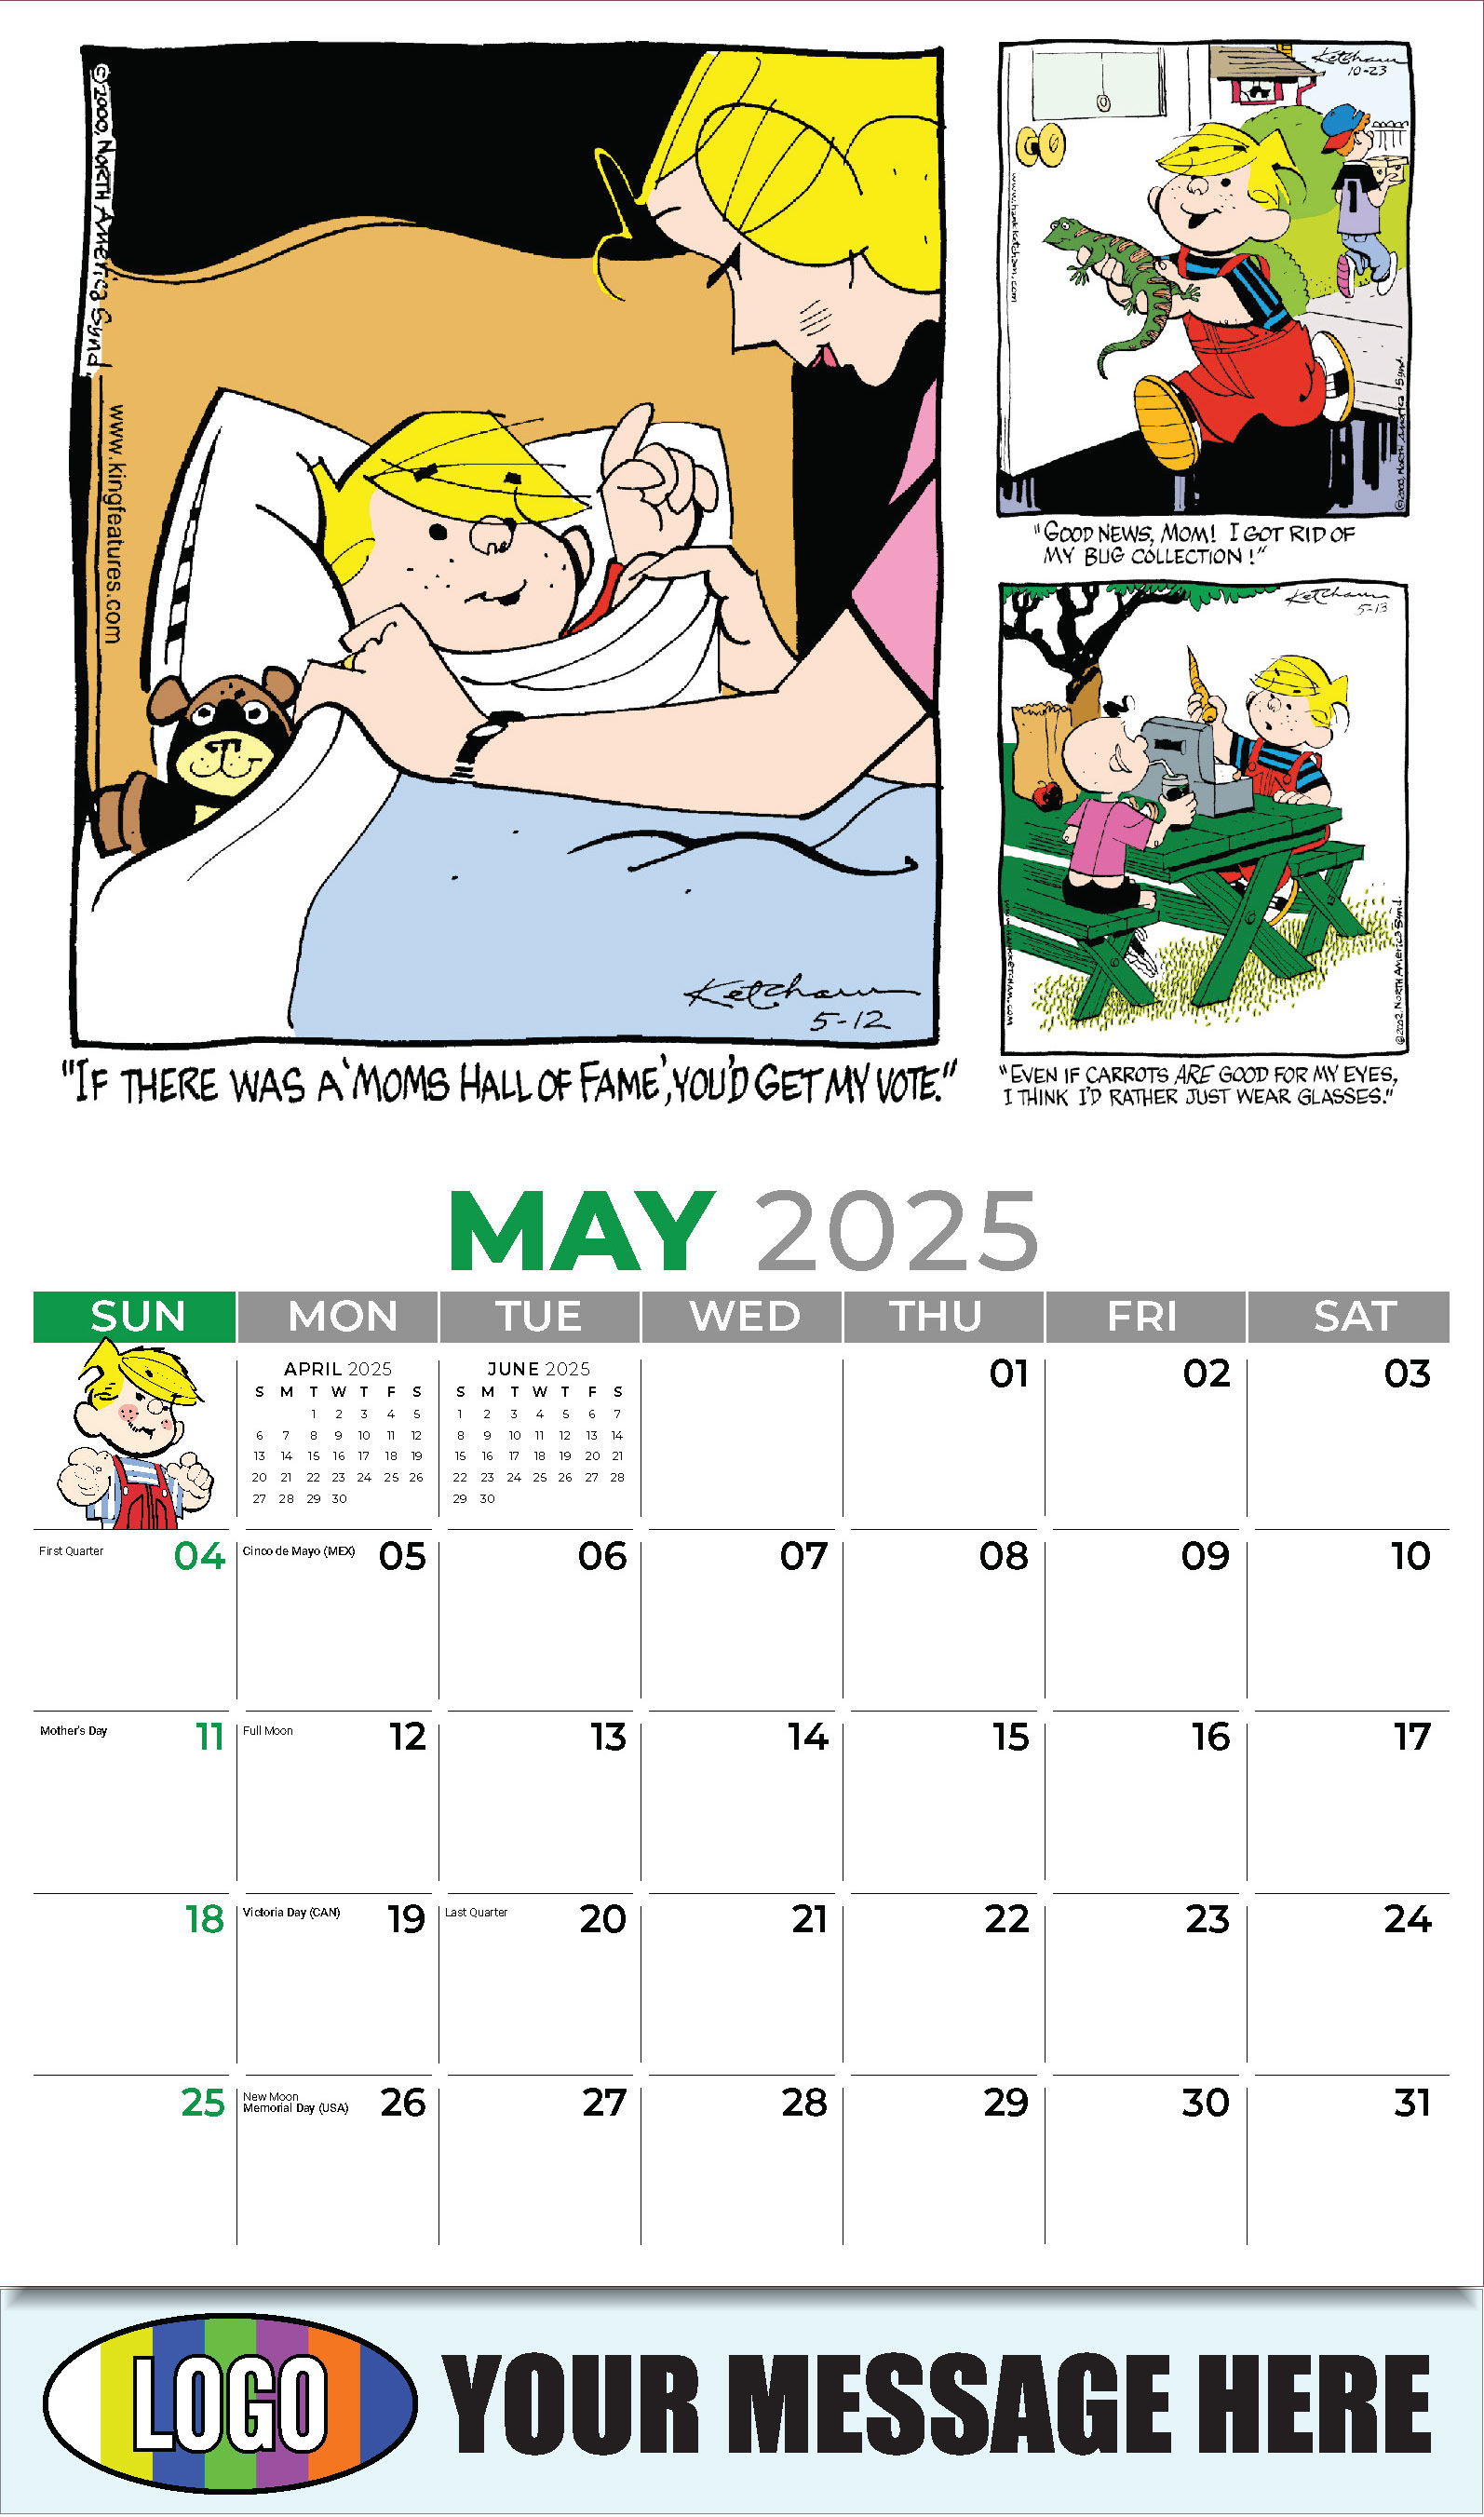 Dennis the Menace 2025 Business Promotional Wall Calendar - May